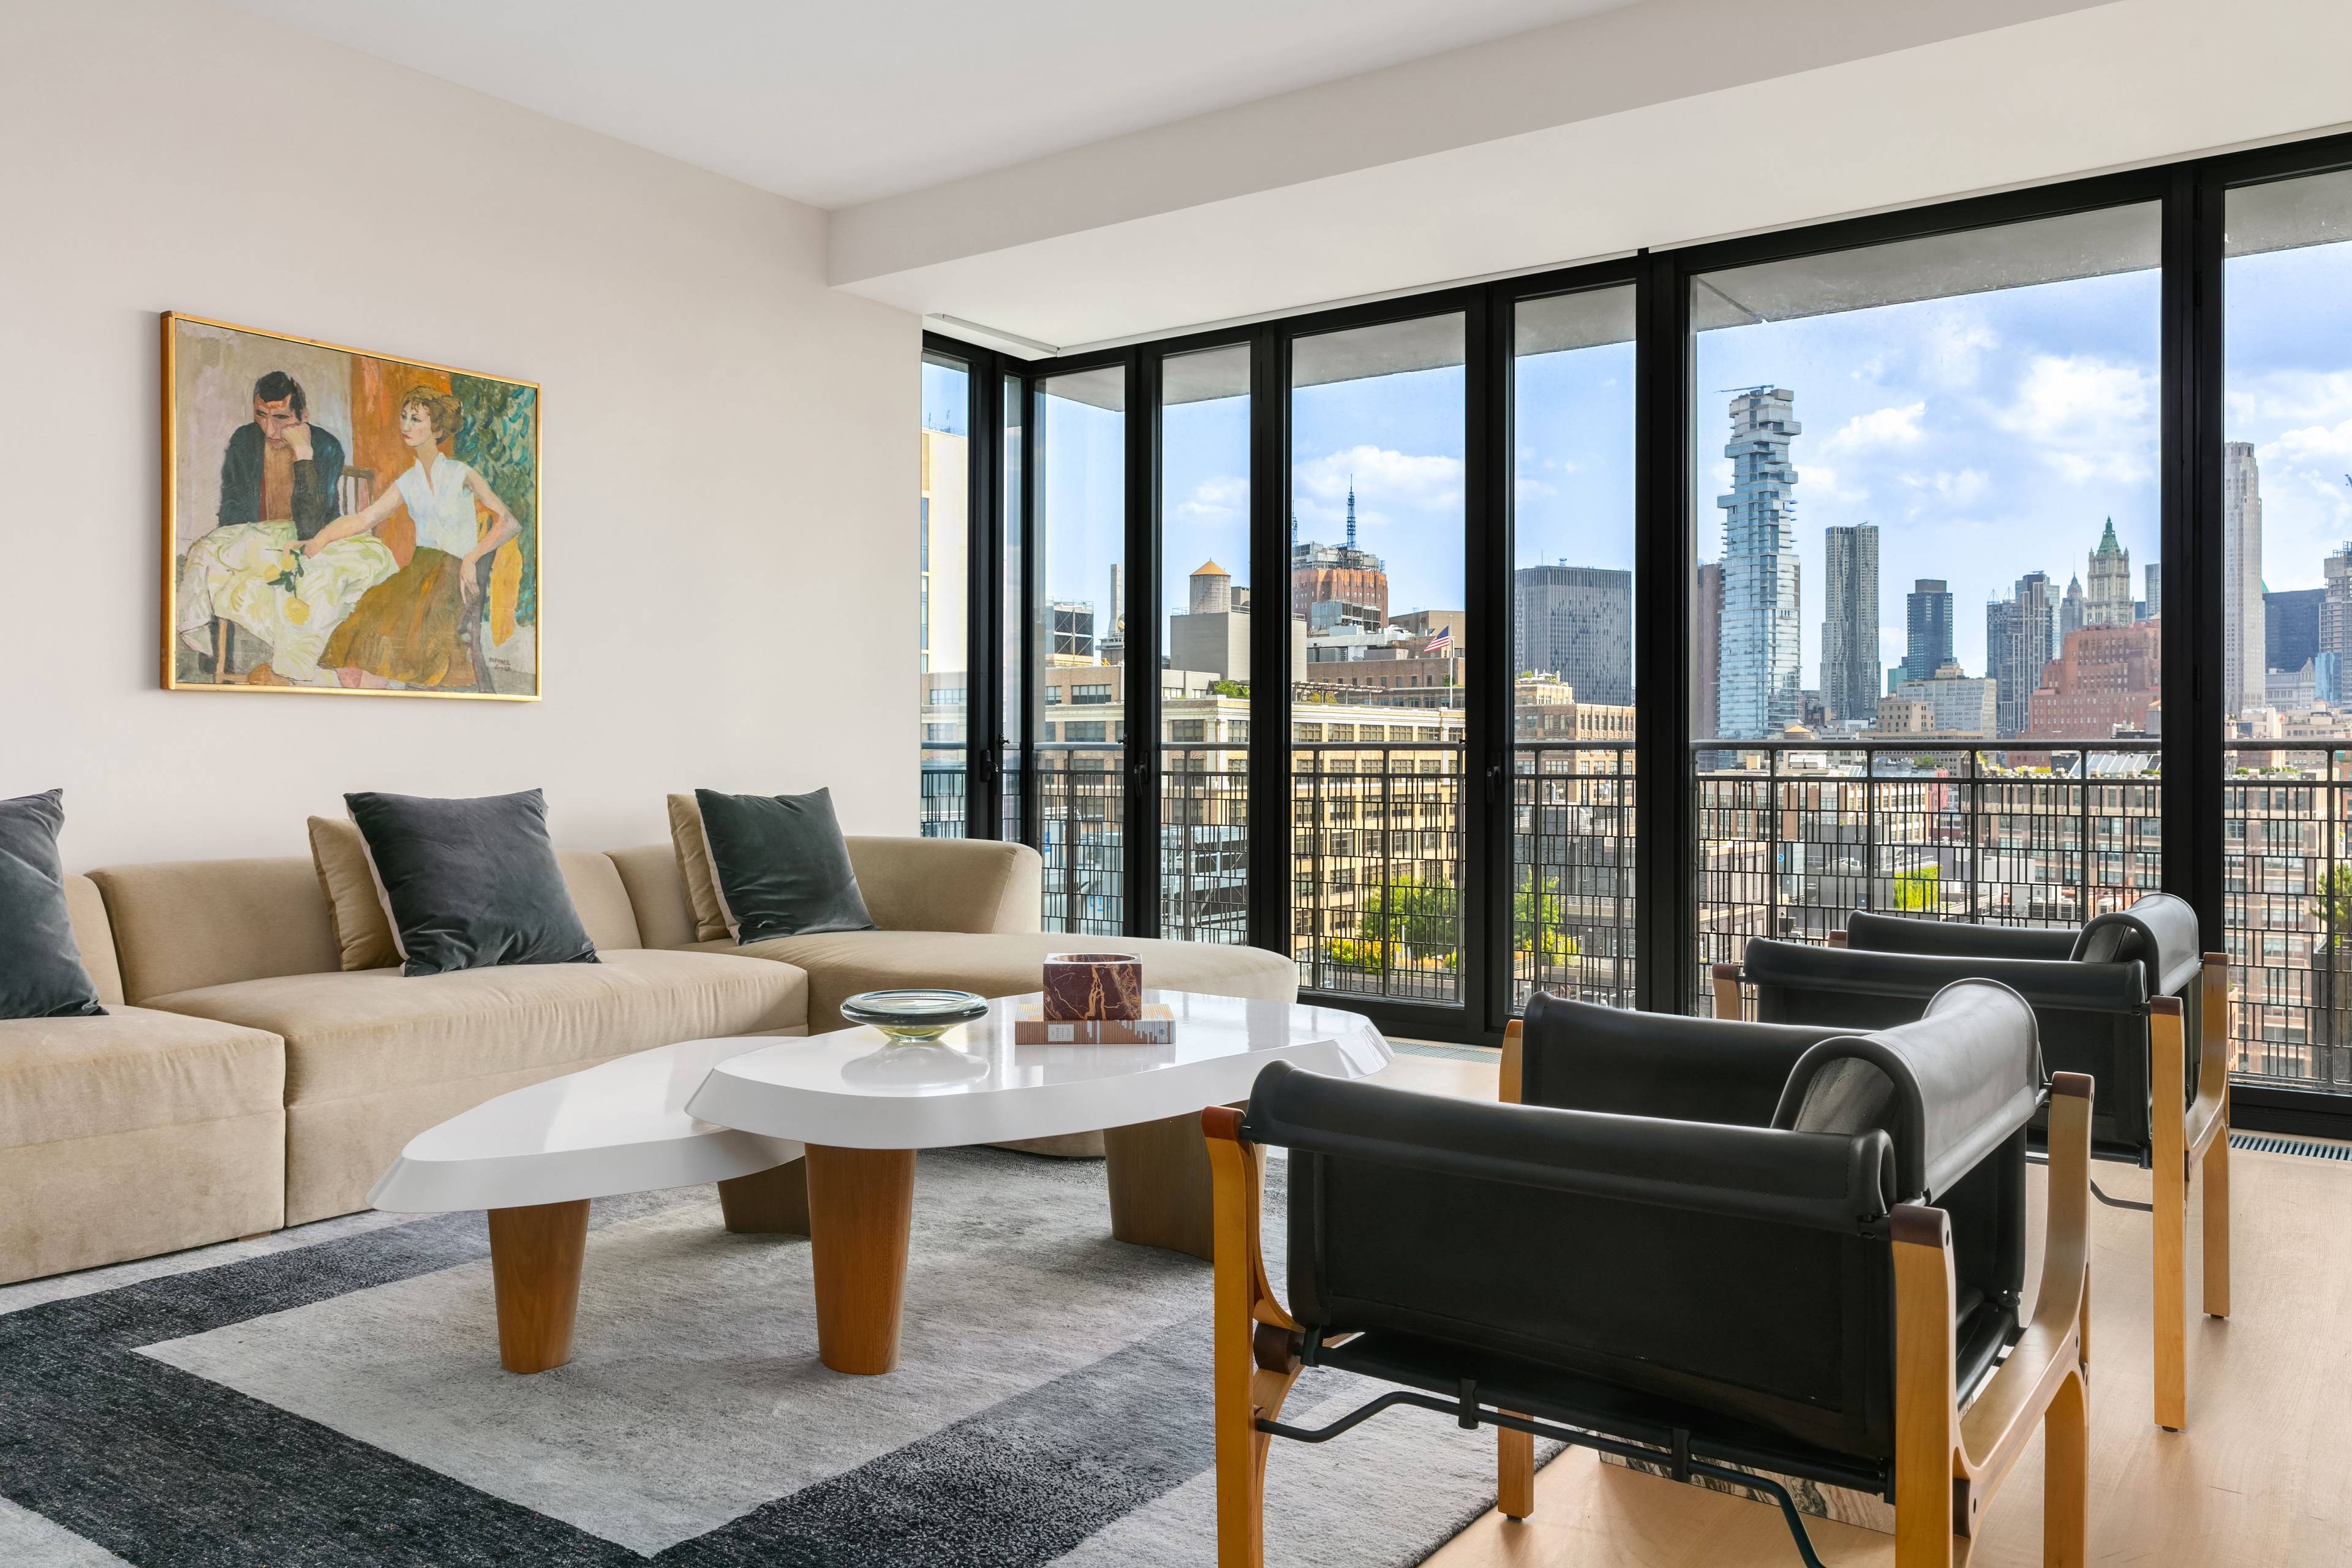 100 VANDAM | SOARING CEILING HEIGHTS WITH SOUTHERN VIEWS